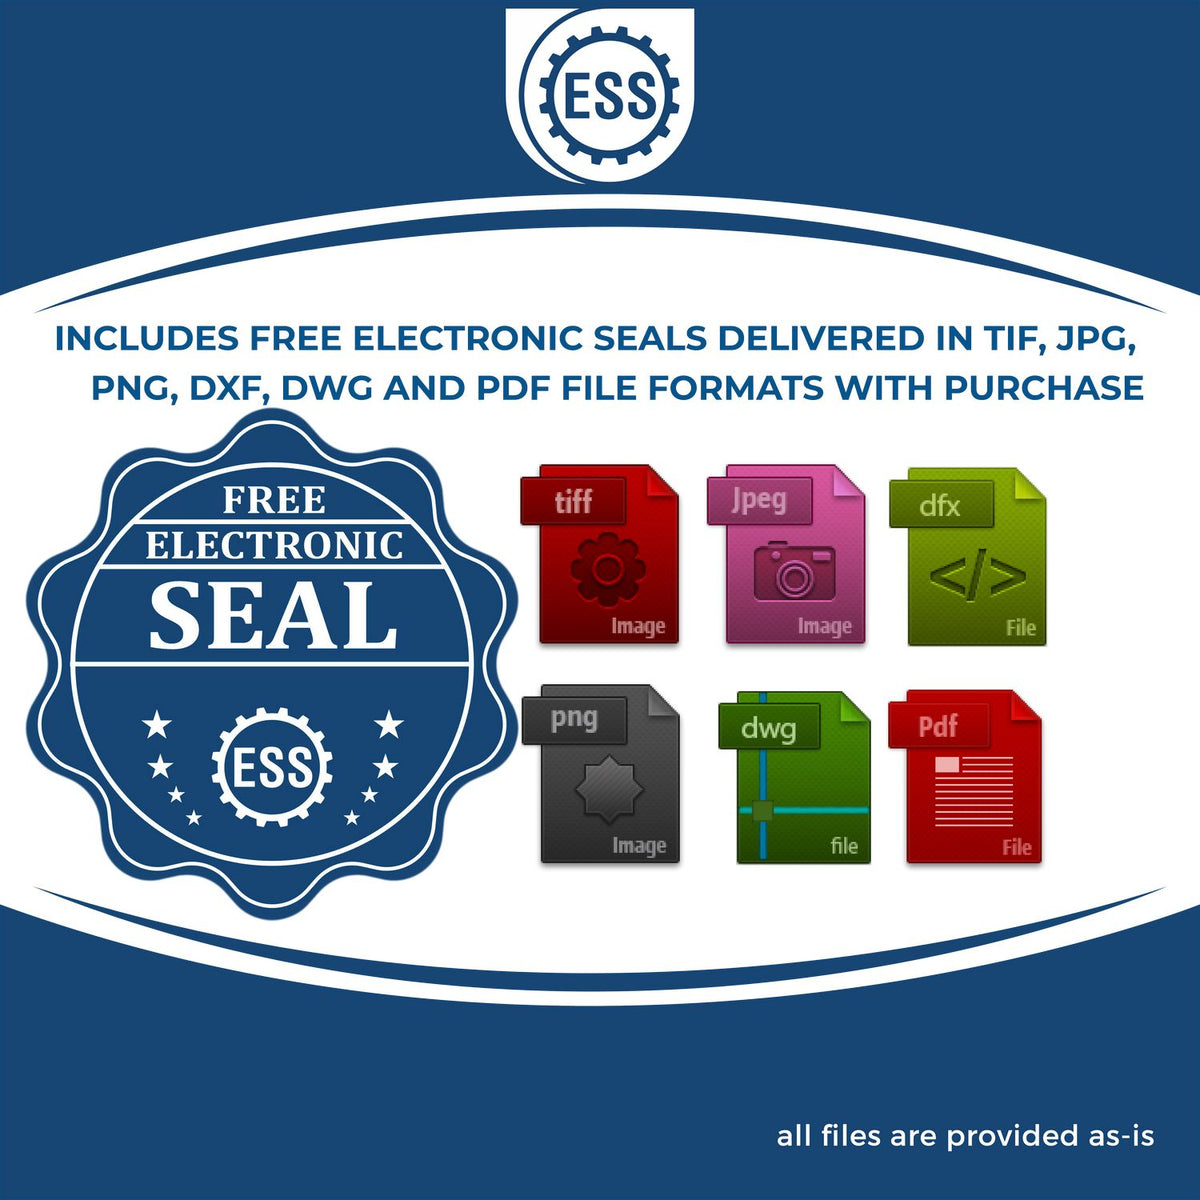 An infographic for the free electronic seal for the State of North Dakota Extended Long Reach Engineer Seal illustrating the different file type icons such as DXF, DWG, TIF, JPG and PNG.